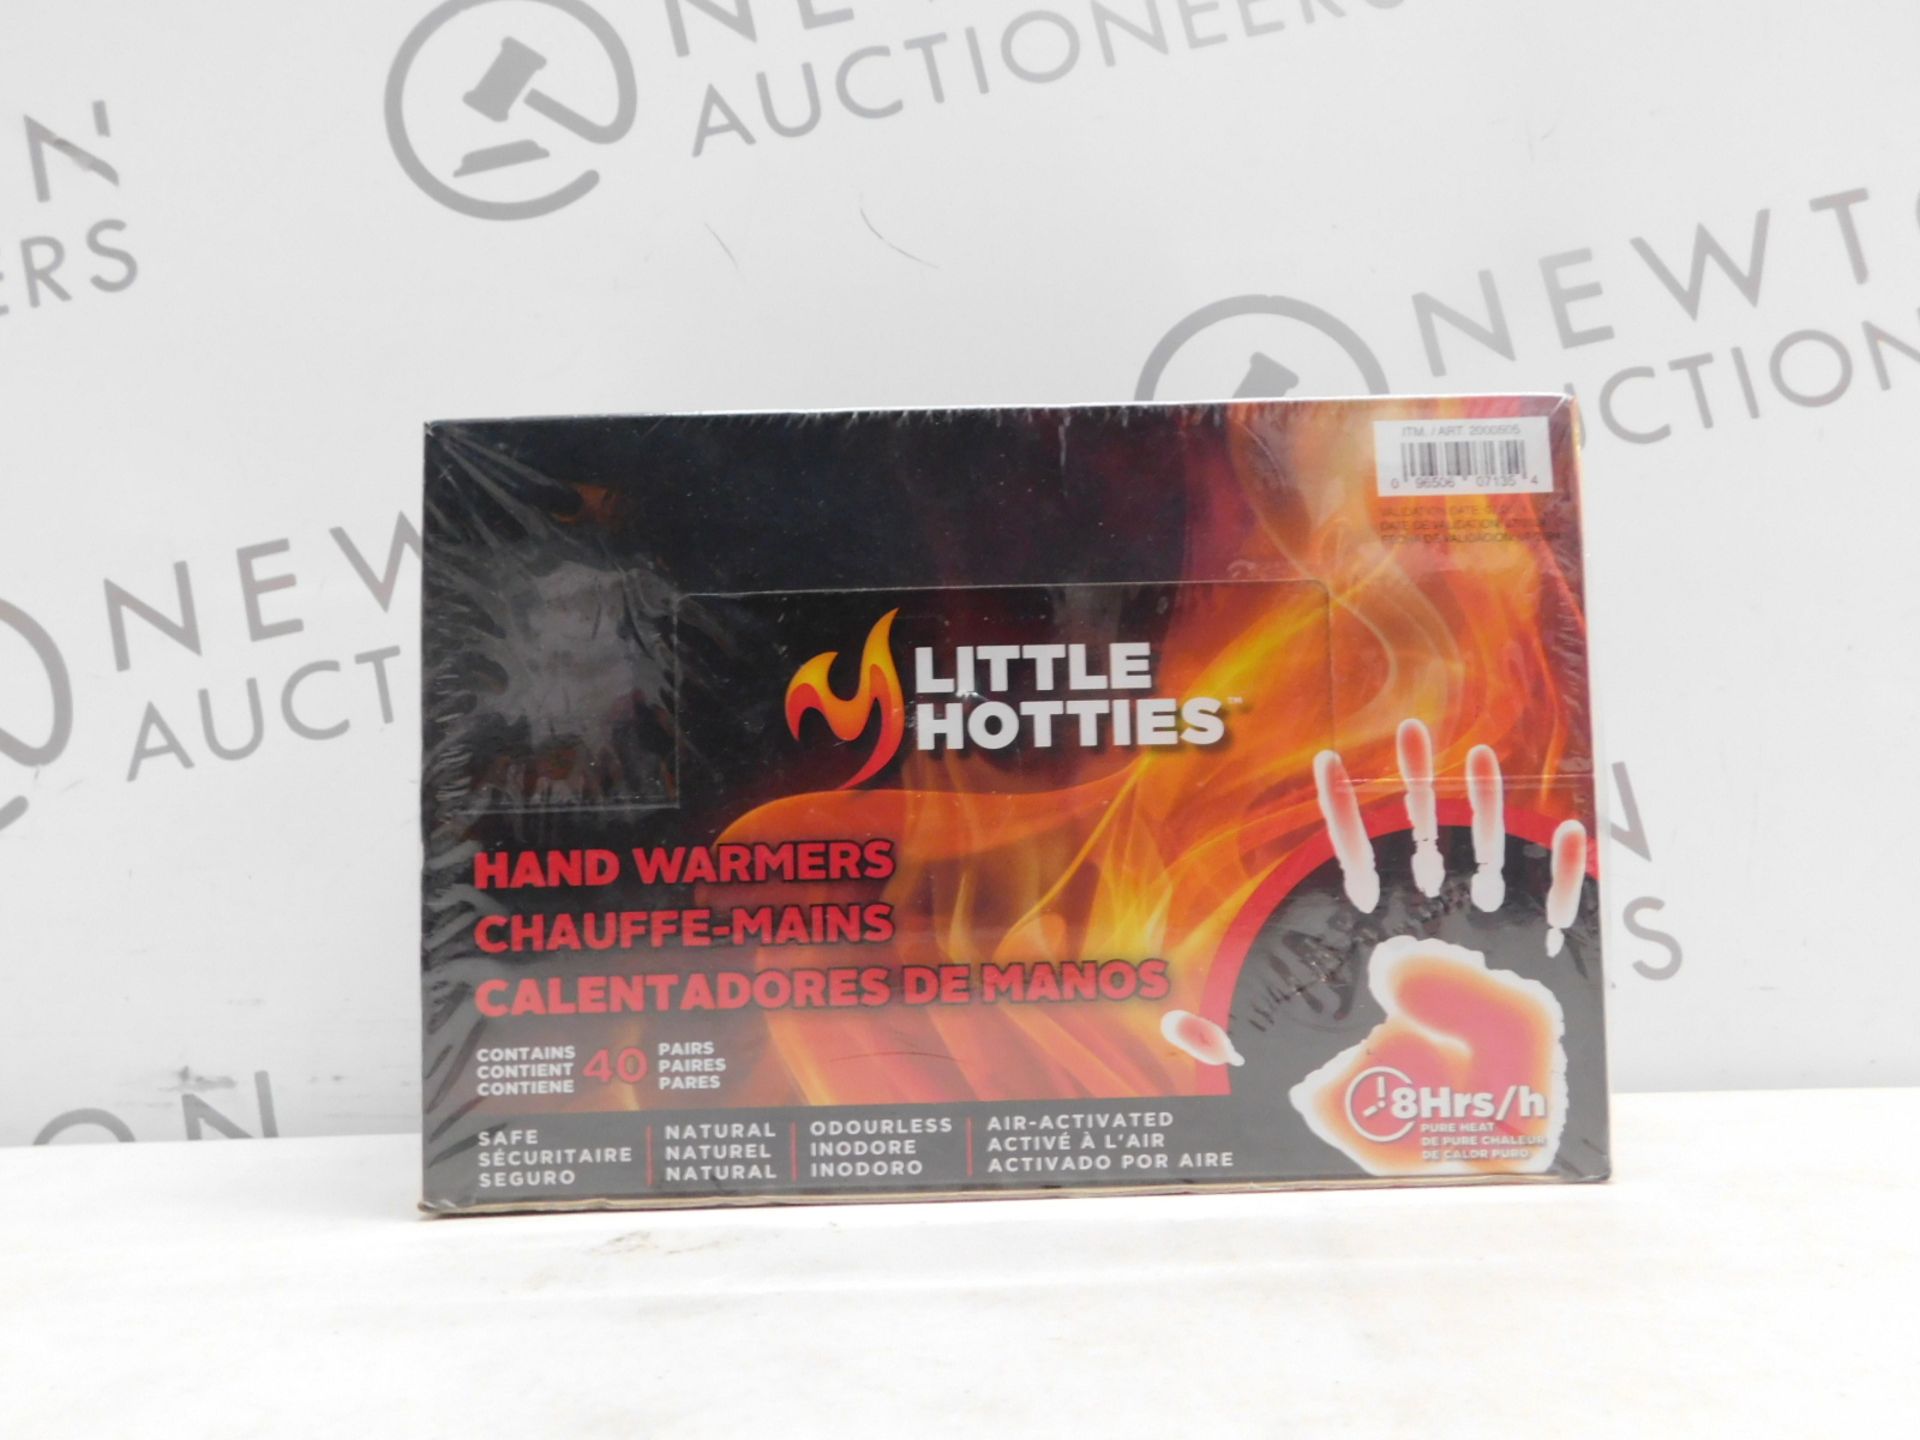 1 BRAND NEW SEALED BOXED LITTLE HOTTIES HAND WARMERS 40 PACK RRP Â£39.99